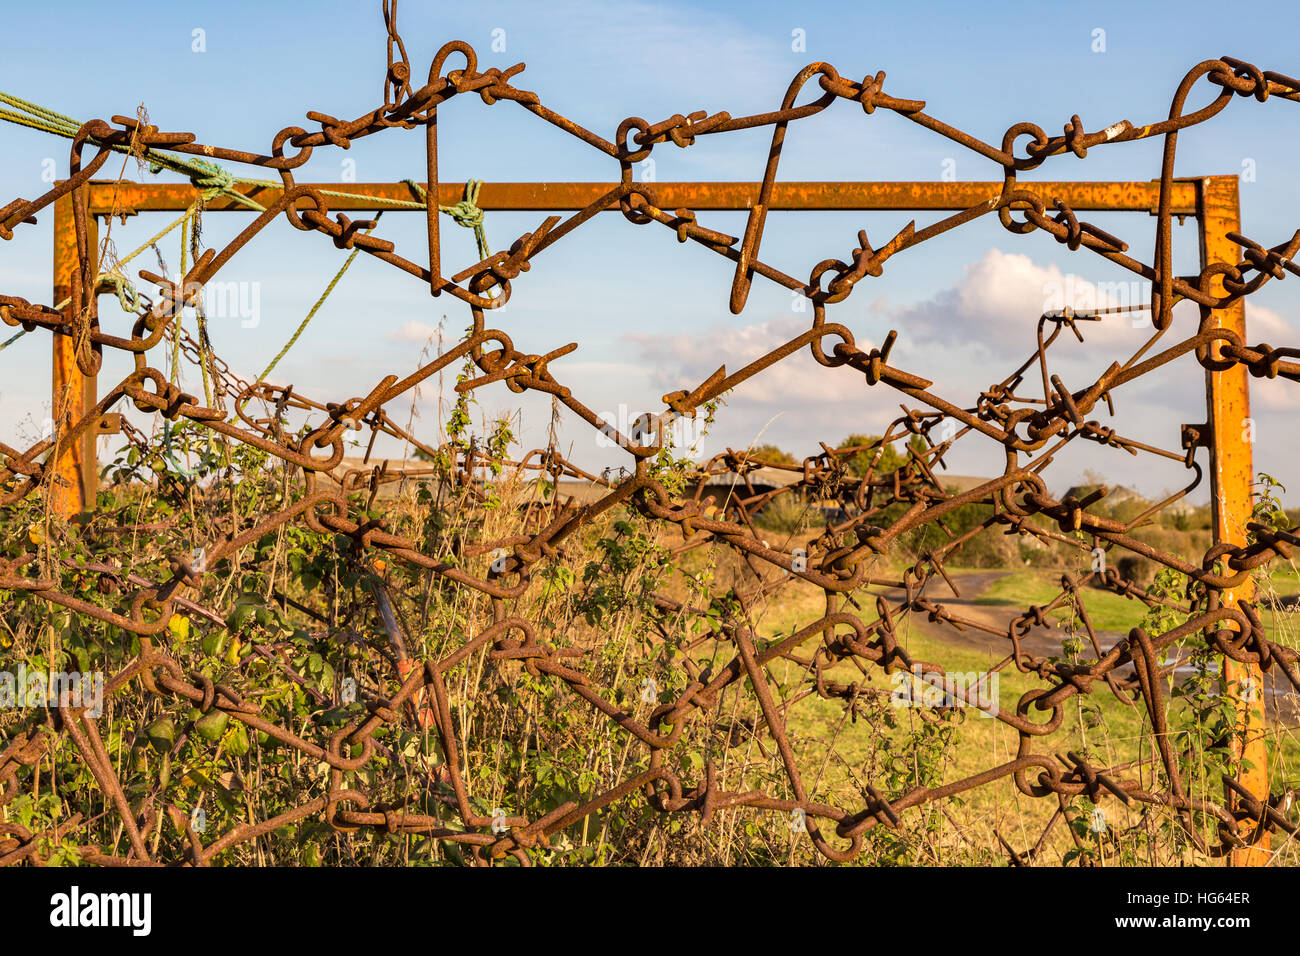 Old farm equipment, rusted and abandoned and used as a fence. Took this shot whilst walking over farmland in Essex. Stock Photo